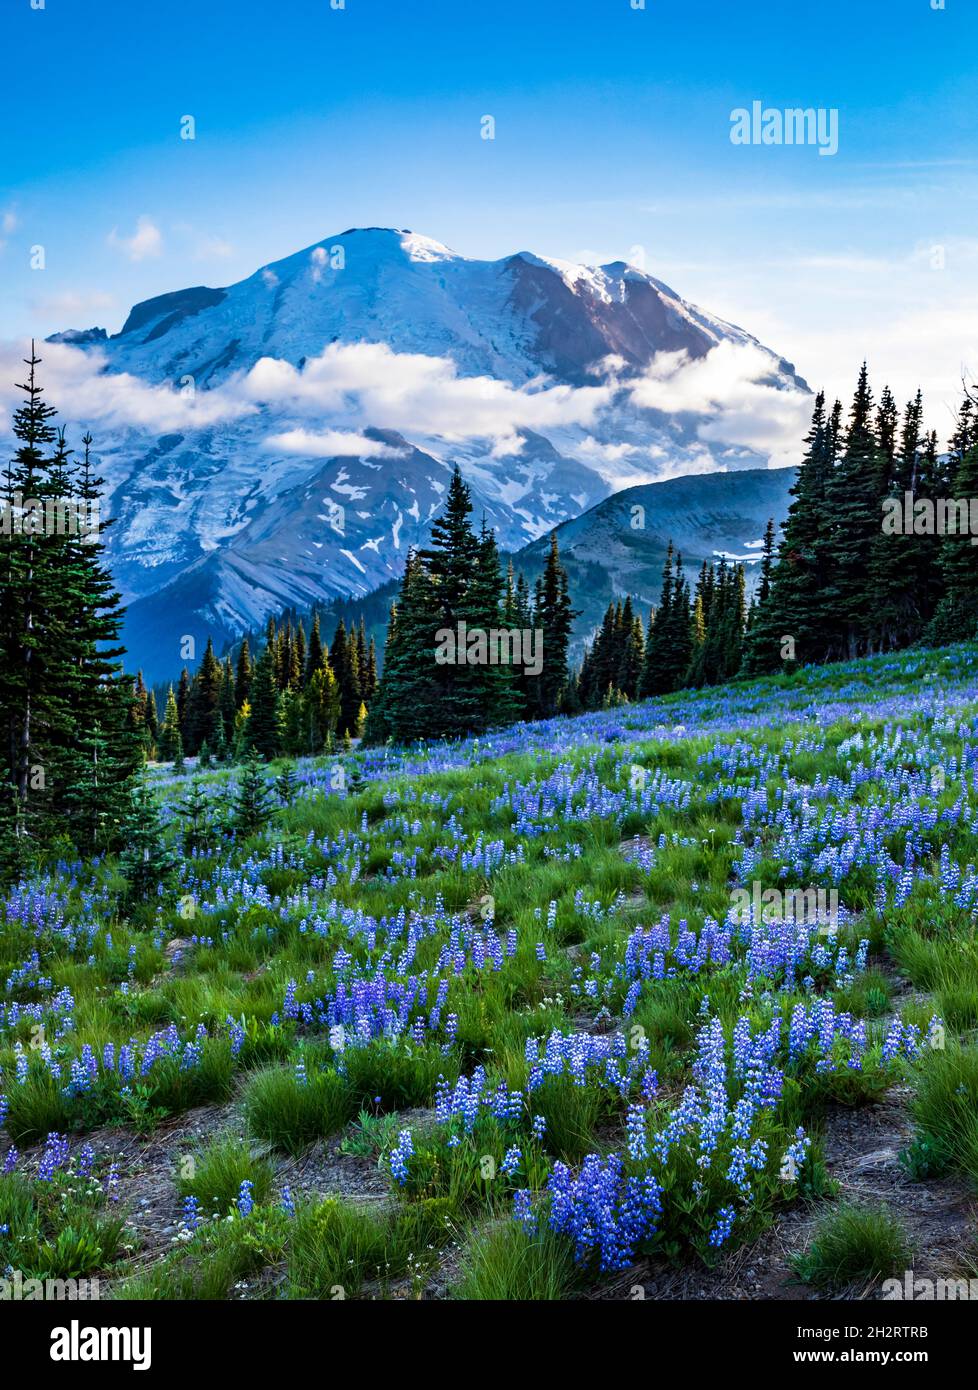 glacier covered Mt. Rainier on the background with the wild subalpine flowers like the dwarf lupine covers the summer meadows in Sunrise in Mt. Rainie Stock Photo